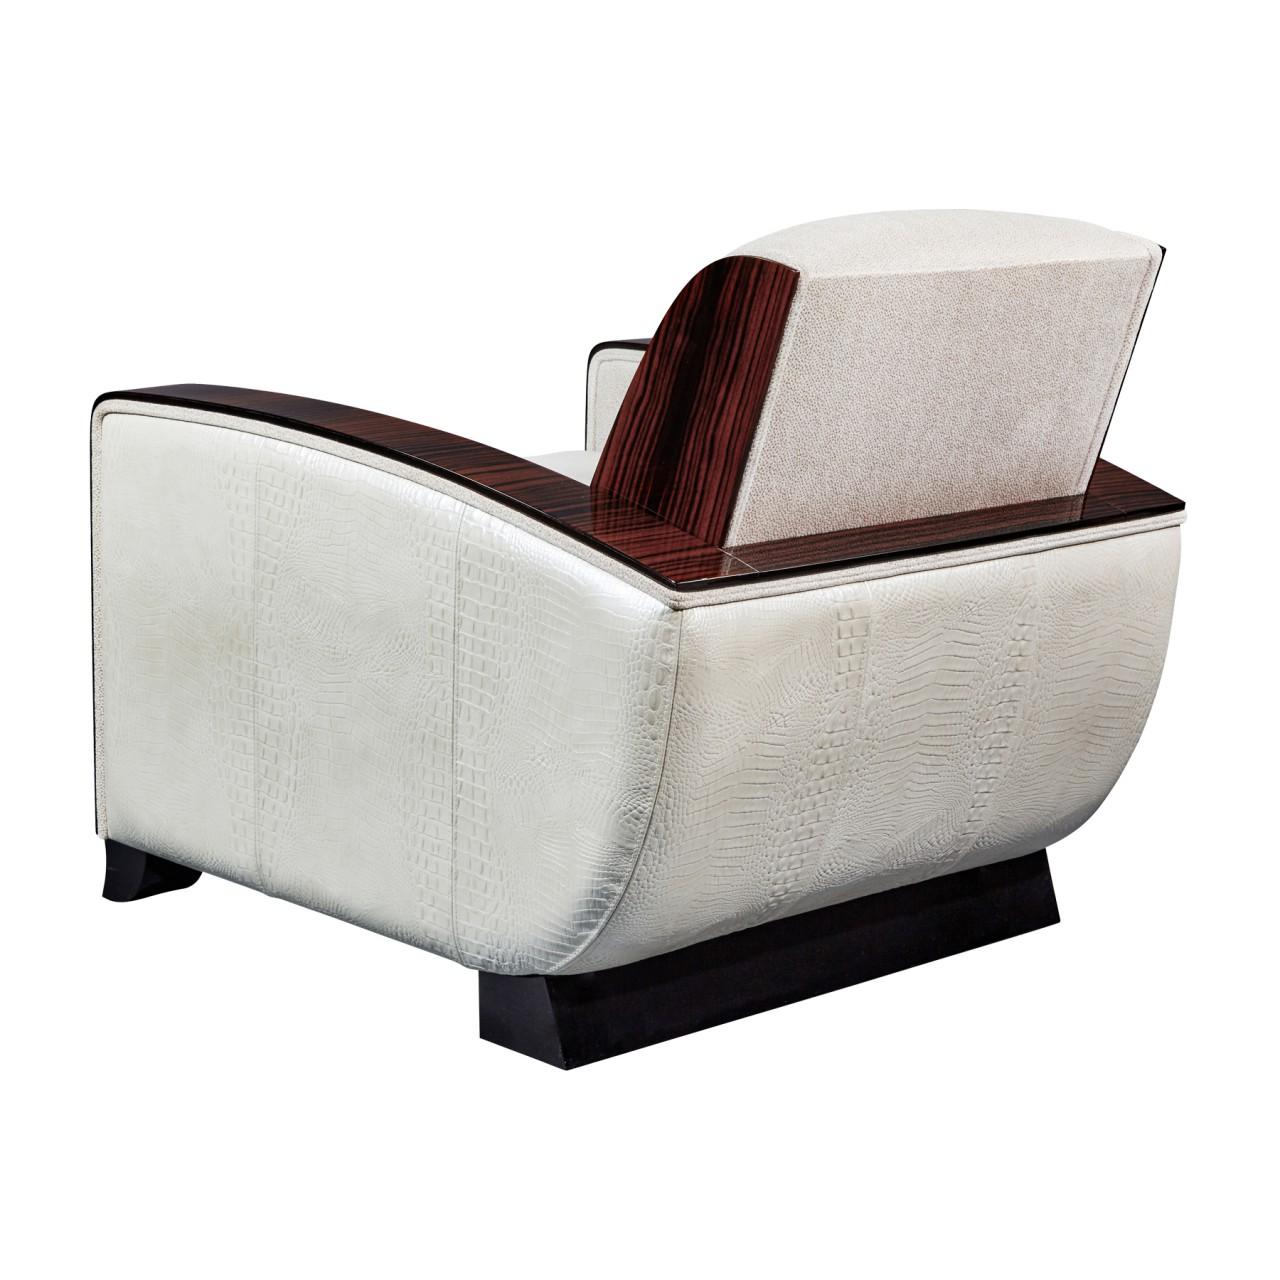 Classic Art Deco club chair. Finest Macassar ebony nicely contrasted by off white upholstery in Dedar textile 